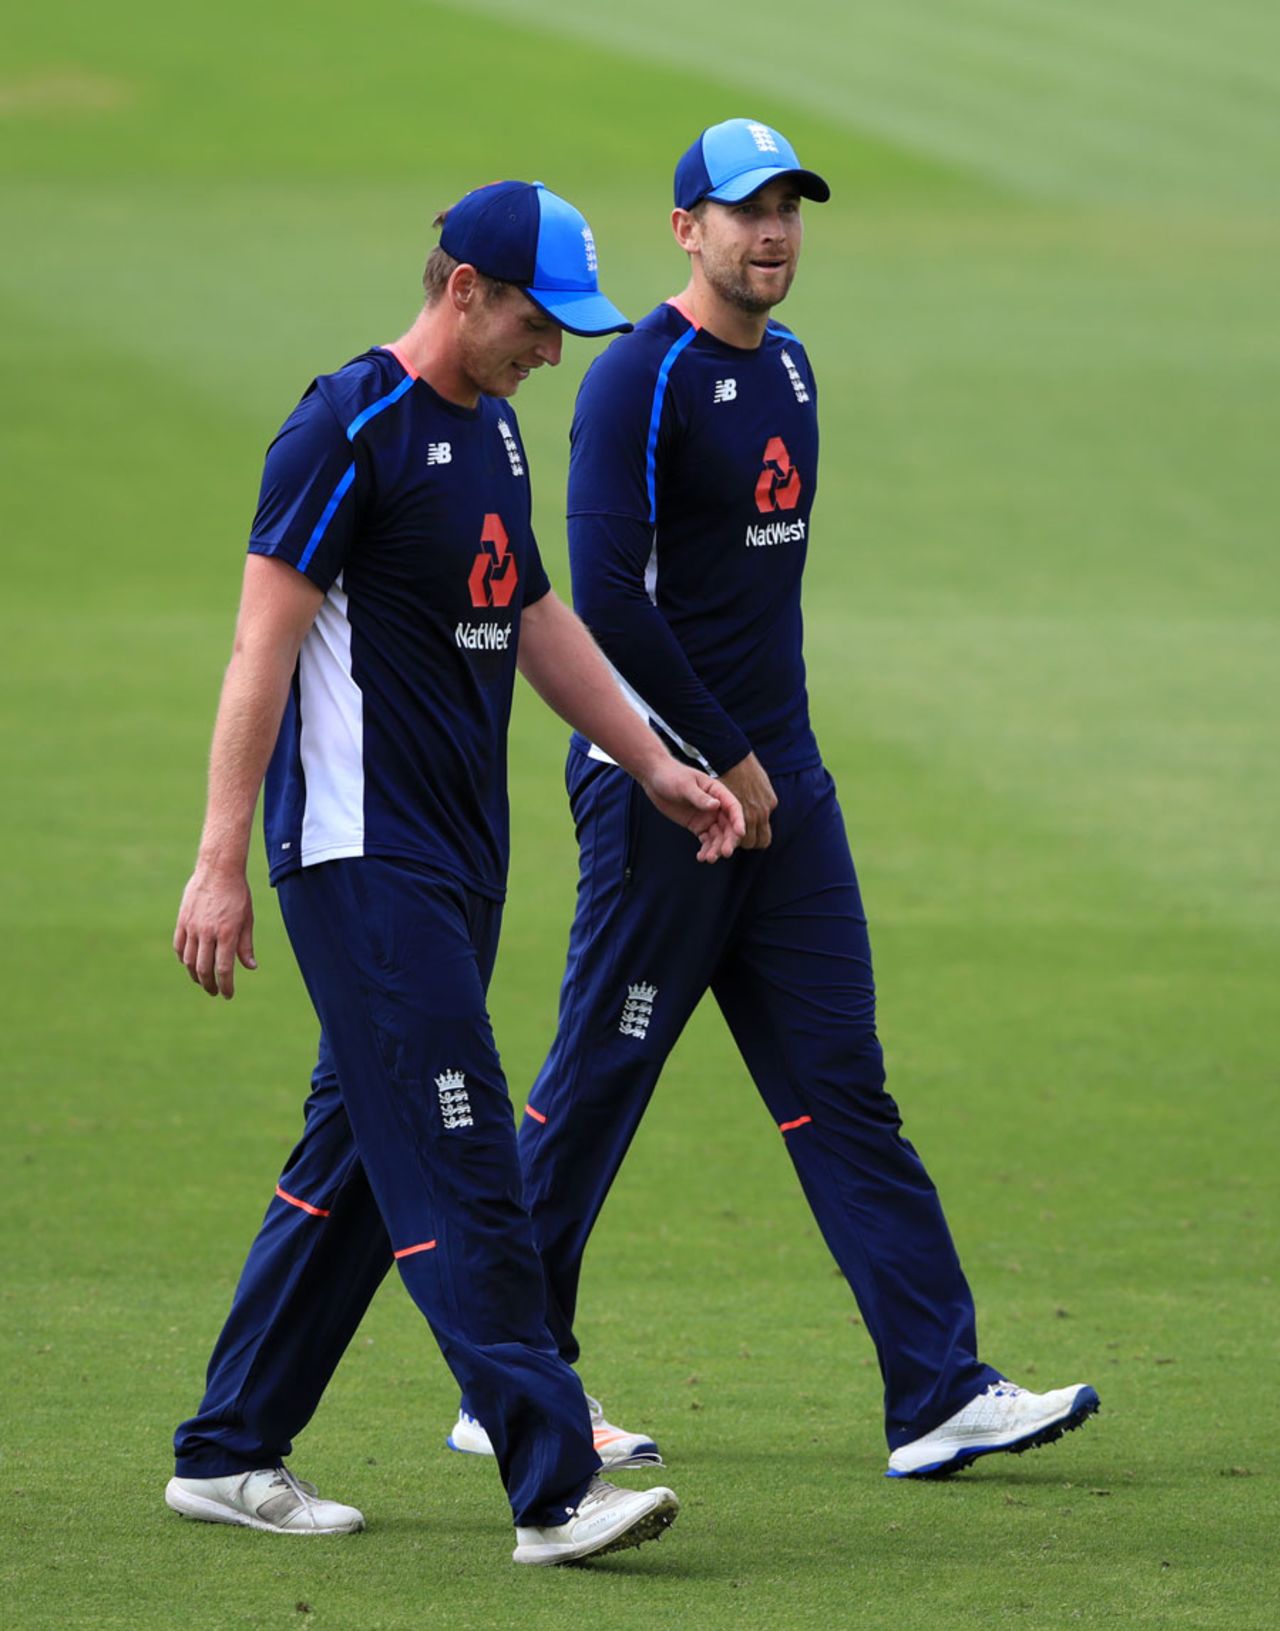 Tom Westley and Dawid Malan take part in training after their maiden Test call-ups, The Oval, July 25, 2017